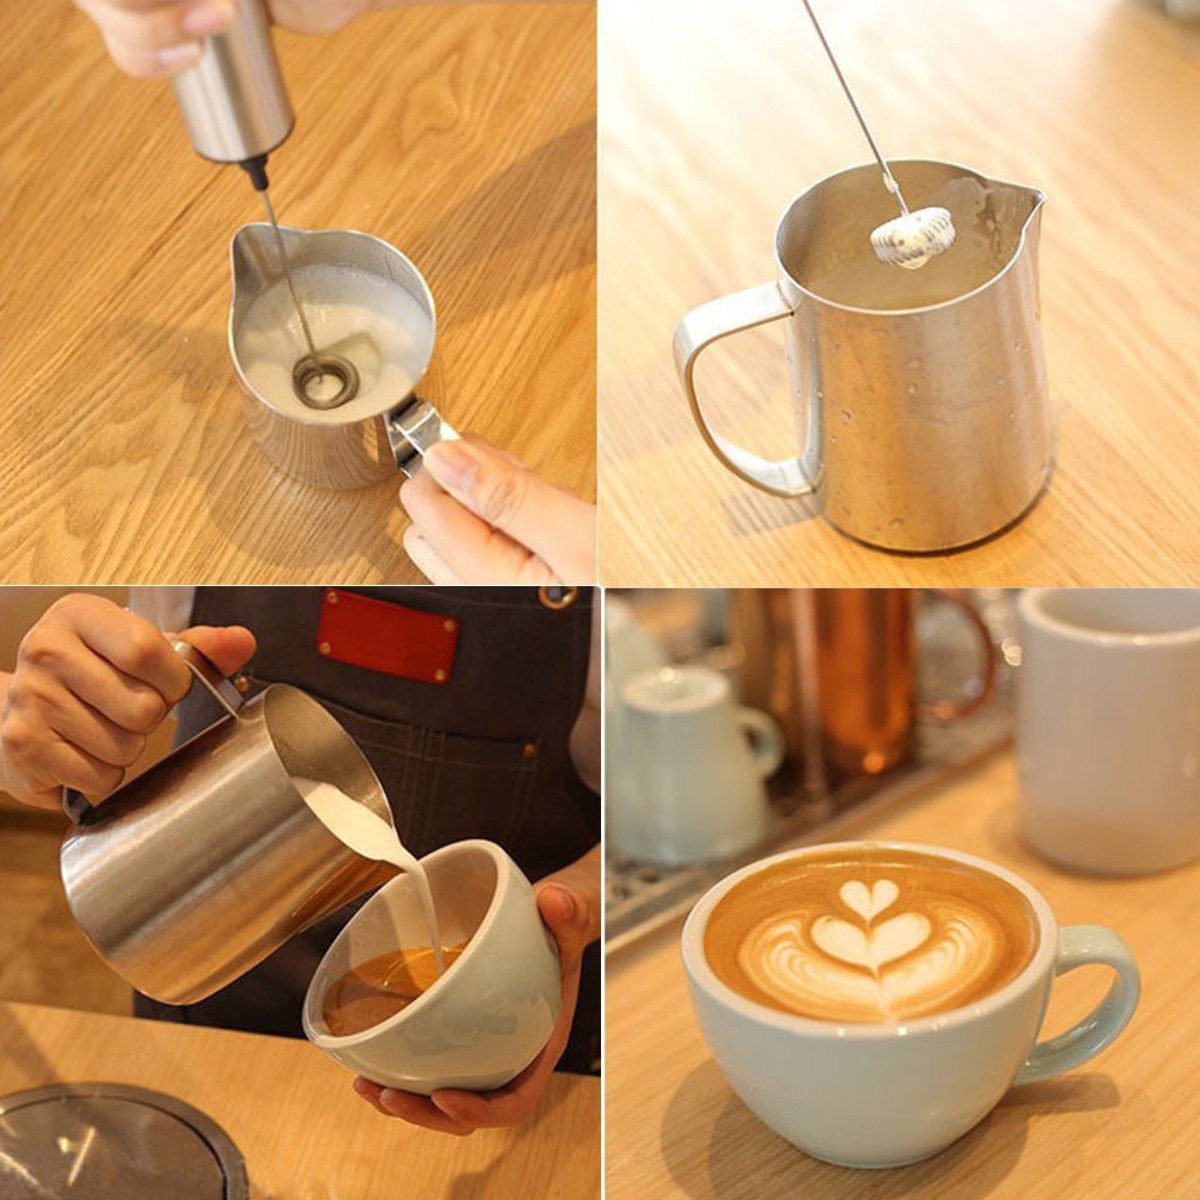 Electric-Handheld-Milk-Frother-Foamer-Mixer-Stainless-Steel-Coffee-Latte-Stirrer-Egg-Beater-1187287